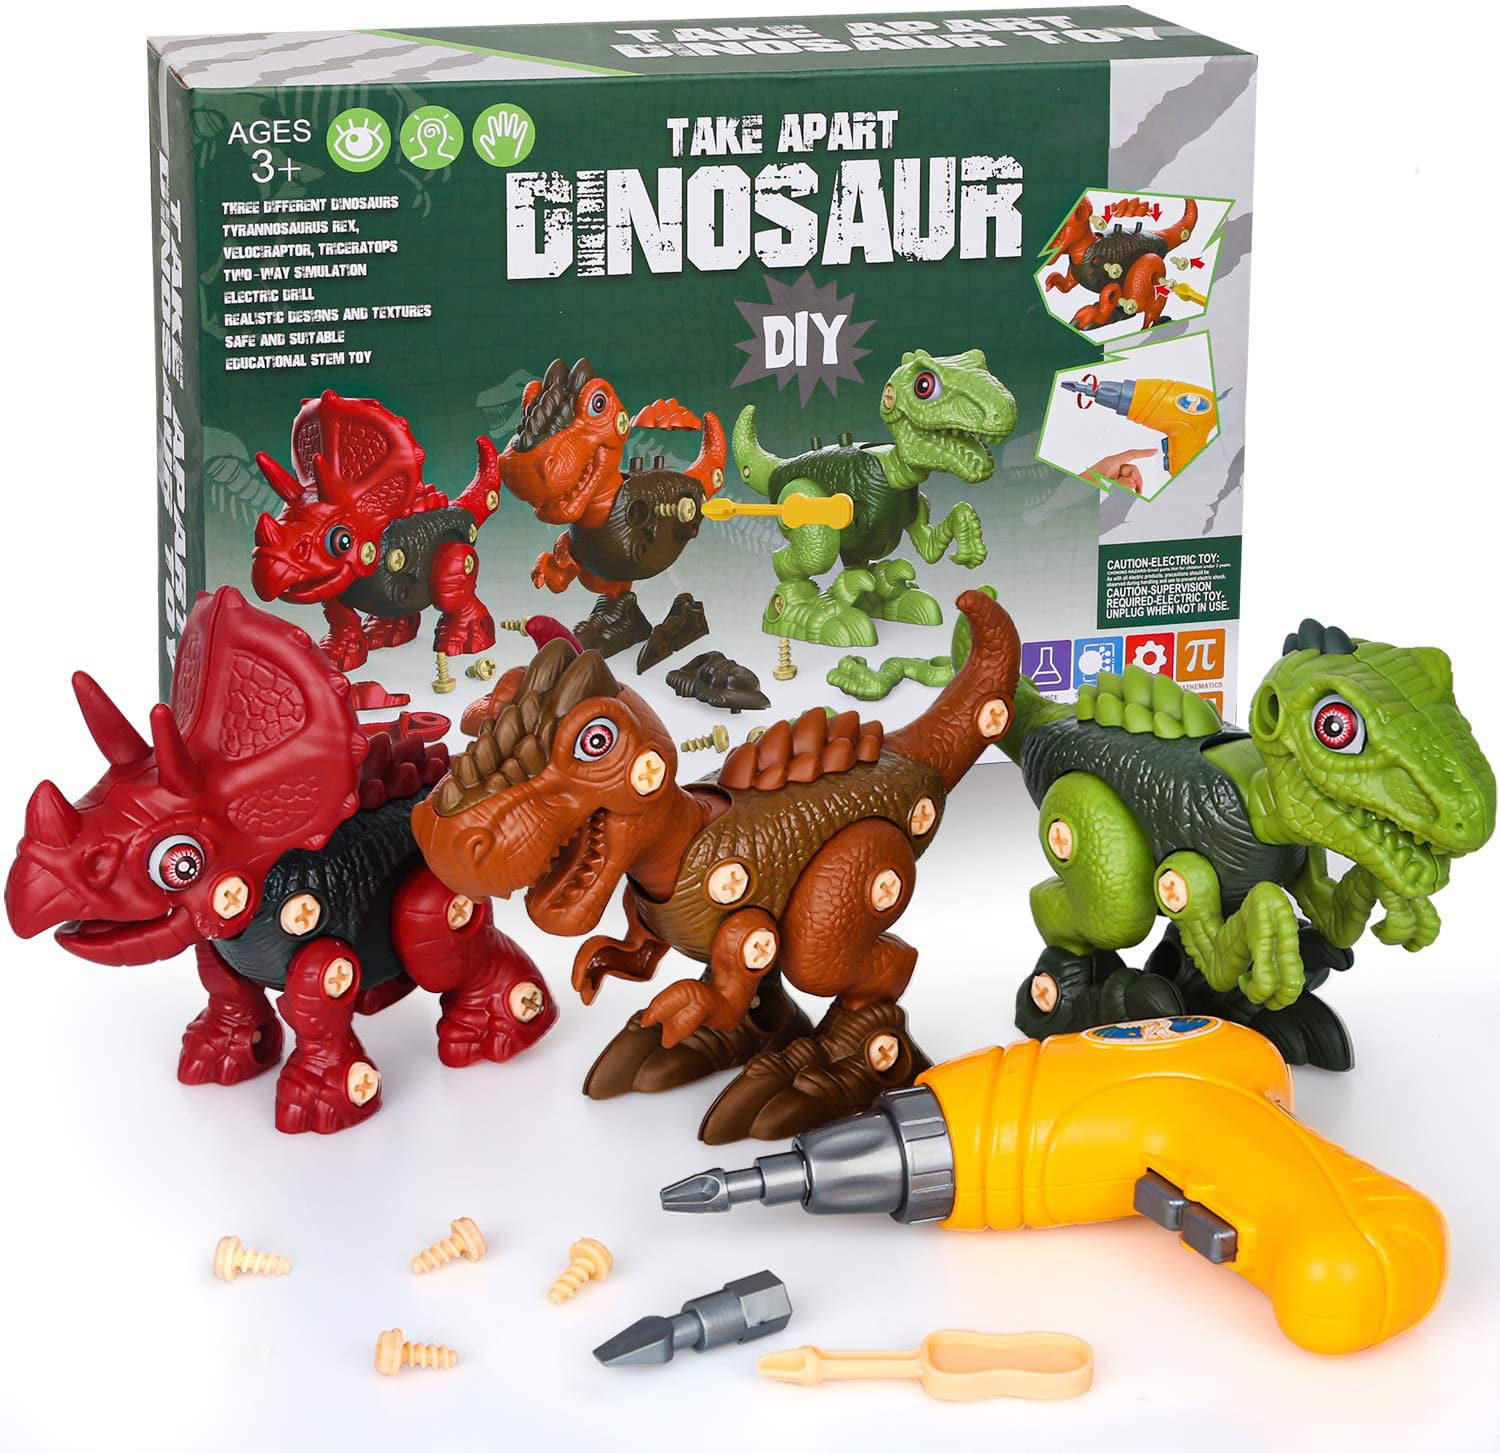 Years Old Boys and Girls BESOO Take Apart Dinosaur Toy with Electric Drill 2 Pack Dino Set Kids Learning Toys Include T-Rex and Velociraptor DIY,STEM Gift for Age 3 